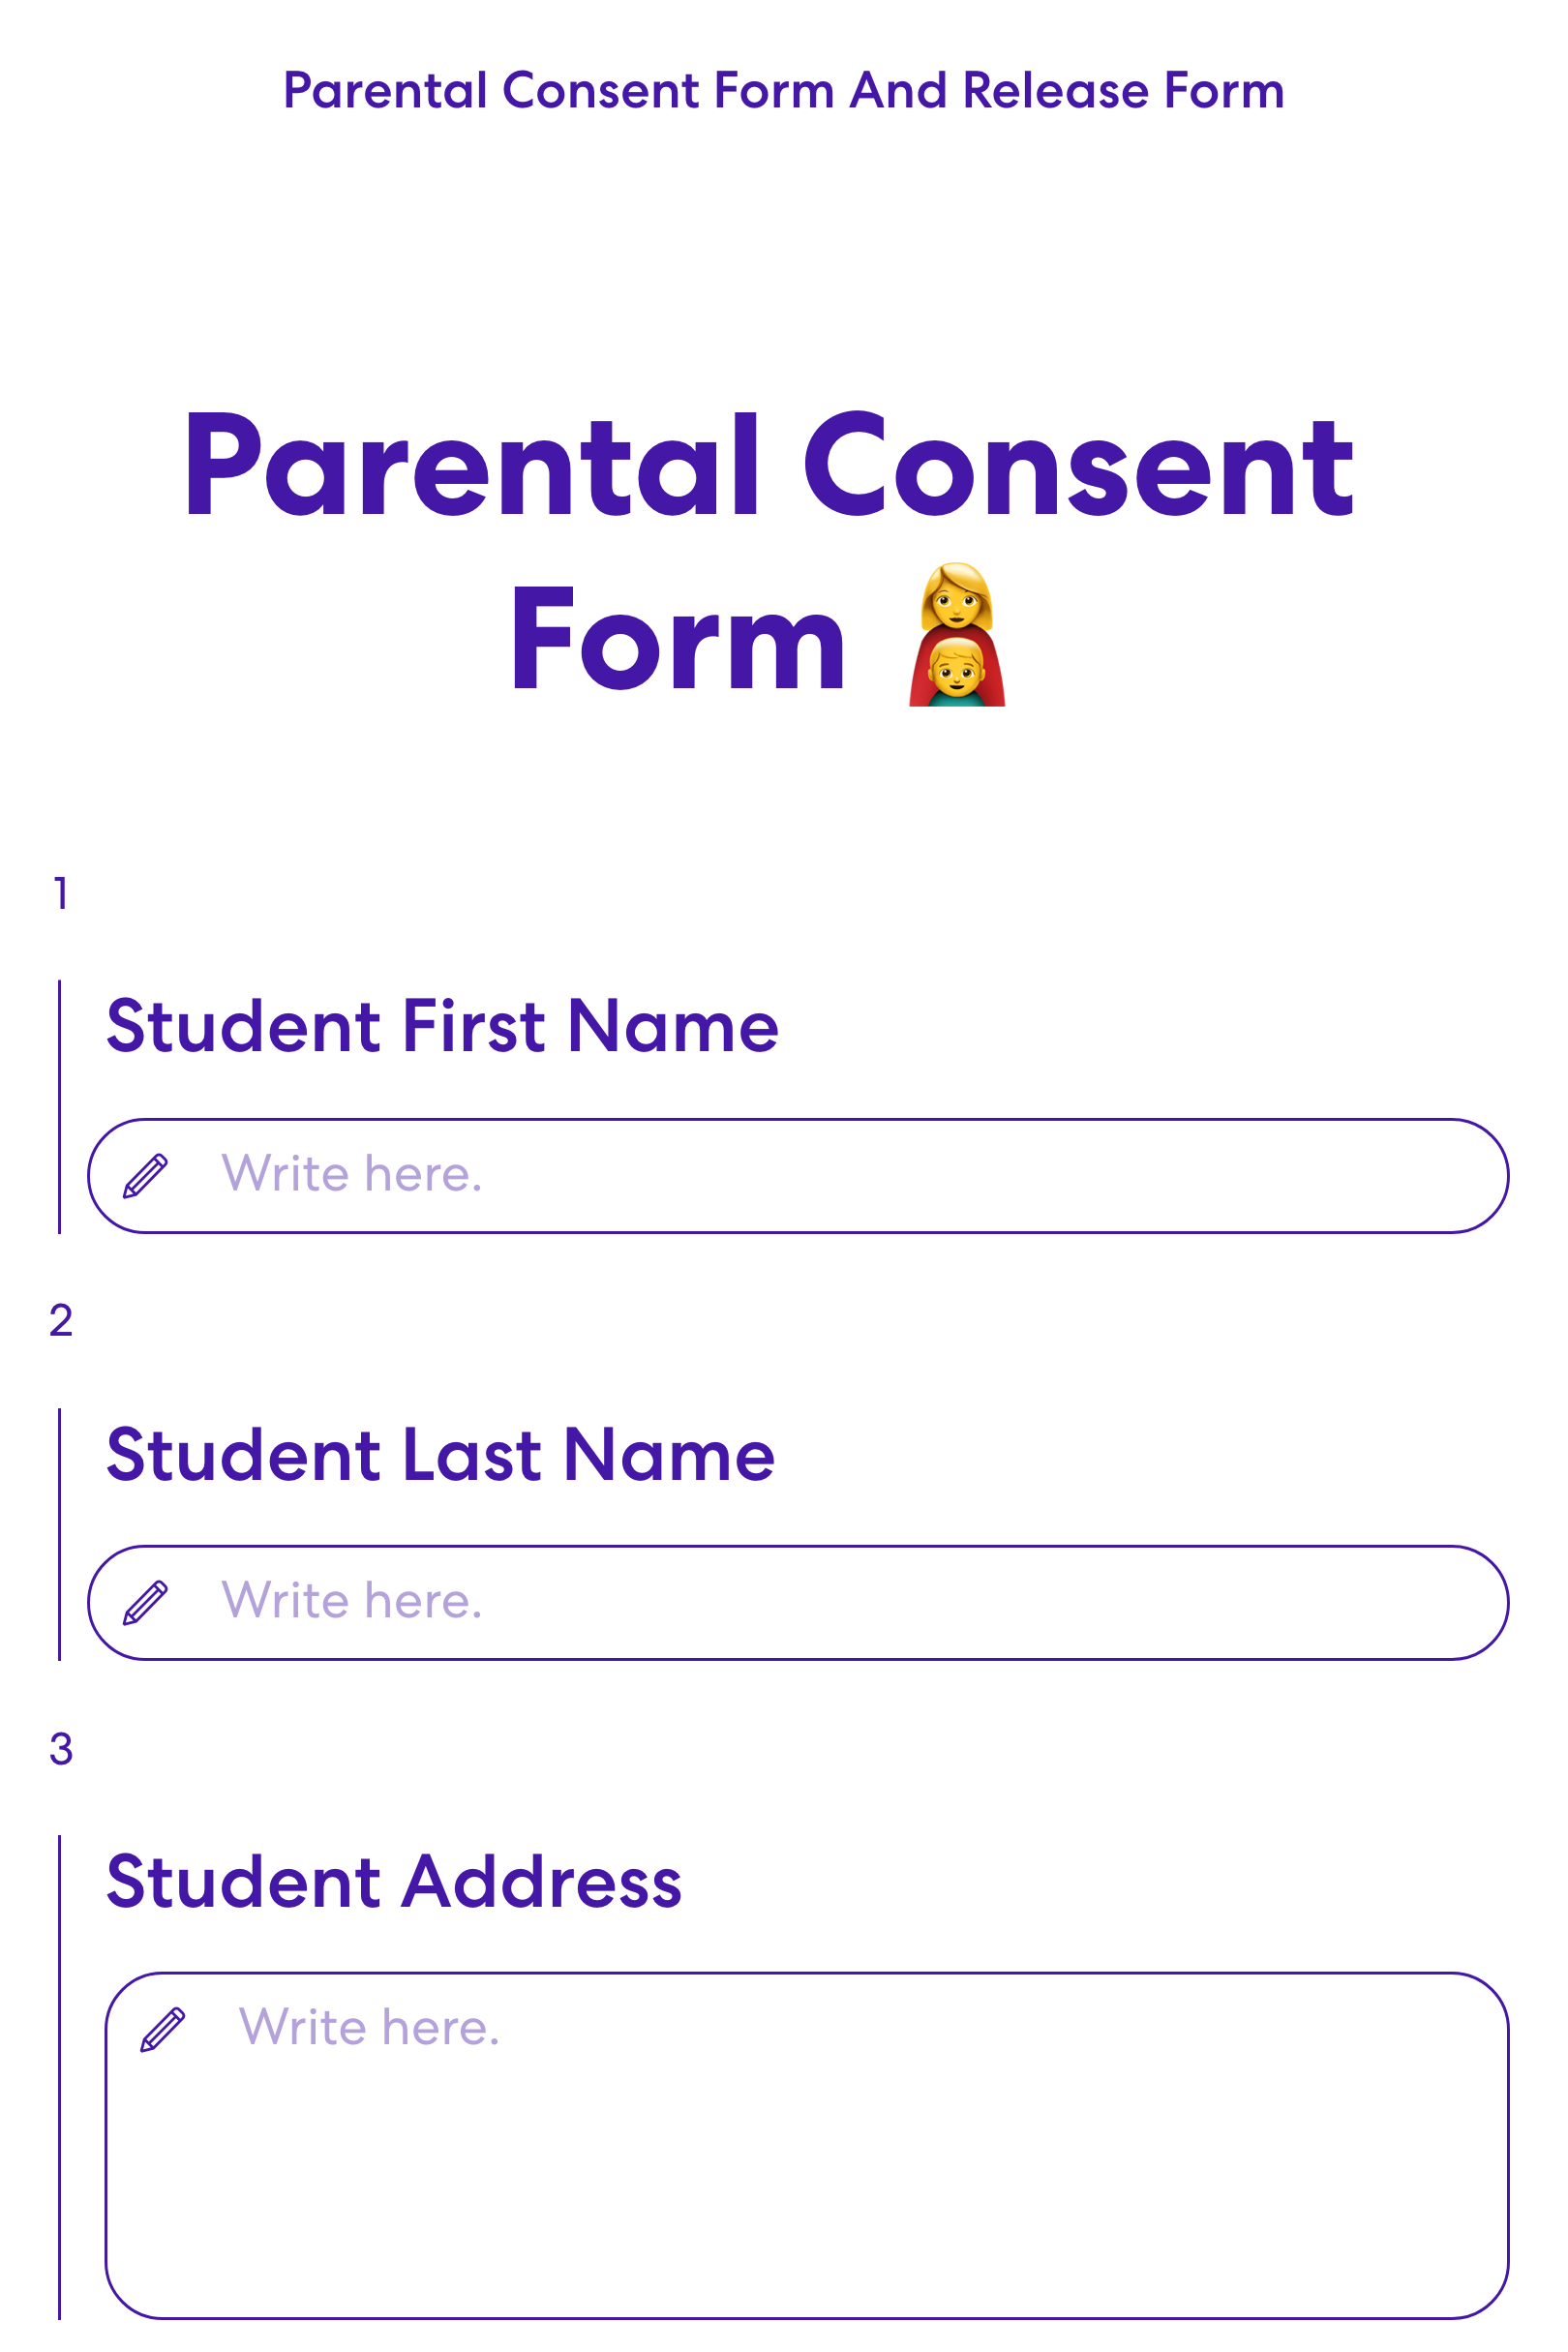 Screenshot of Parental Consent Form And Release Form template